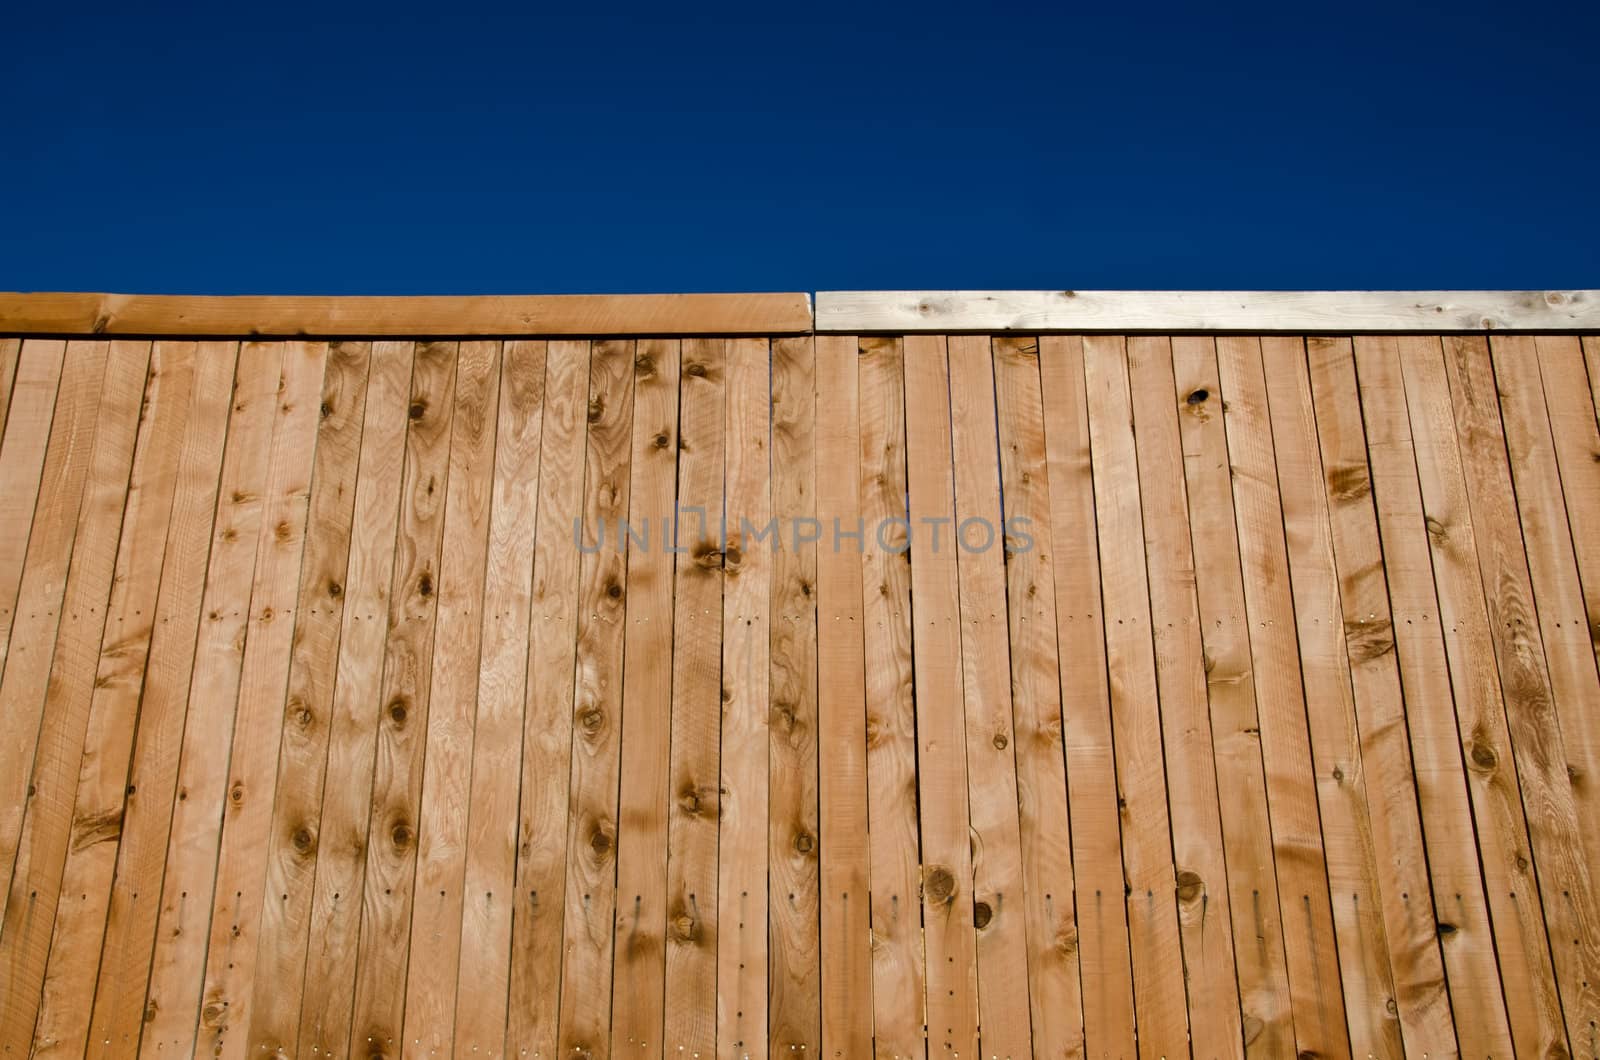 Image of a wooden fence shot from a low angle looking slightly up with blue sky